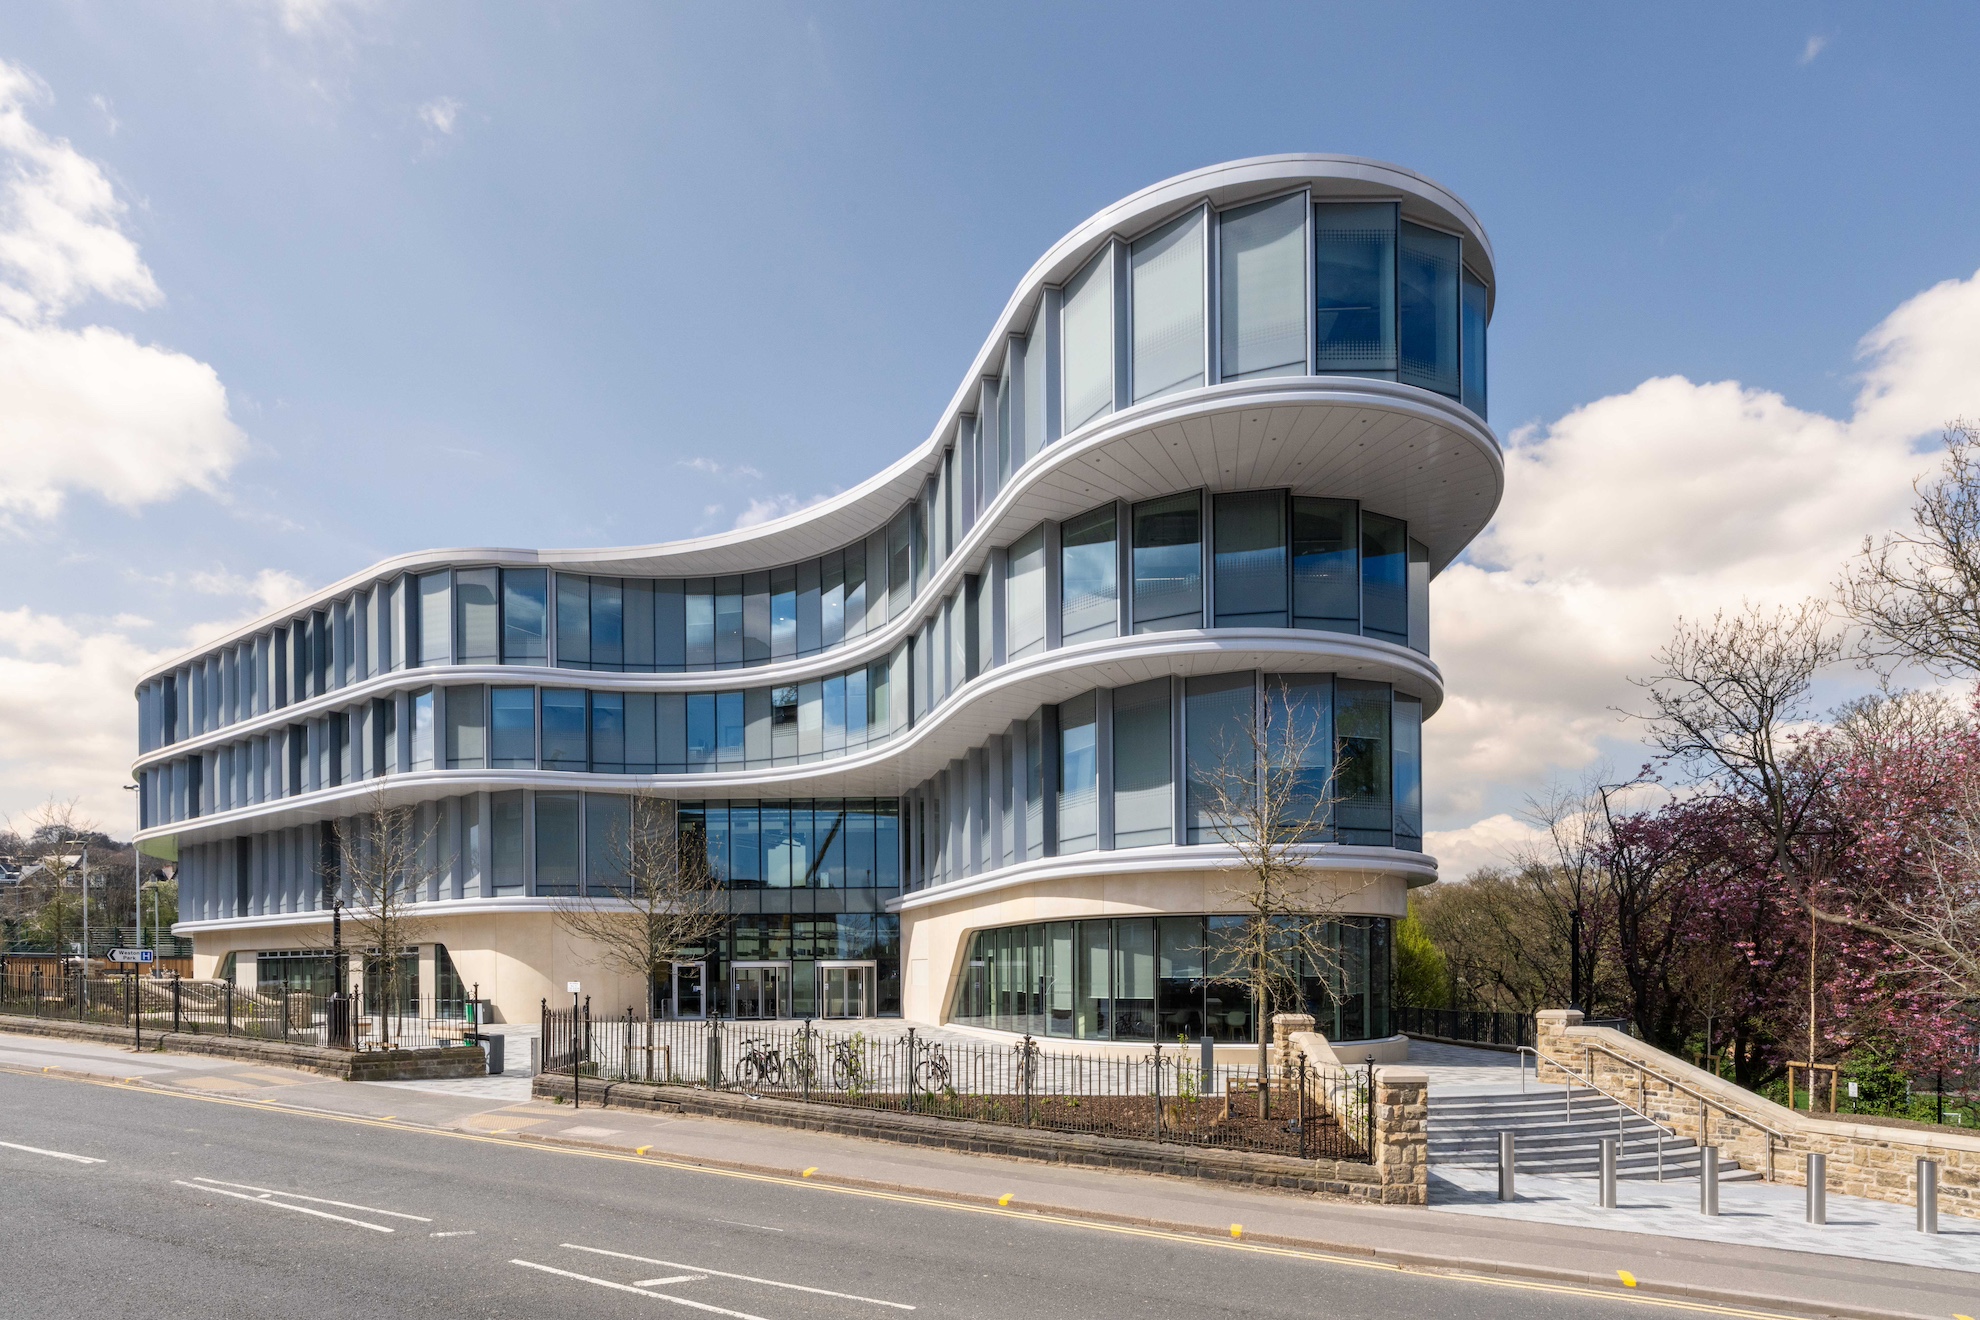 The Wave - the heart of the University of Sheffield's Faculty of Social Sciences campus